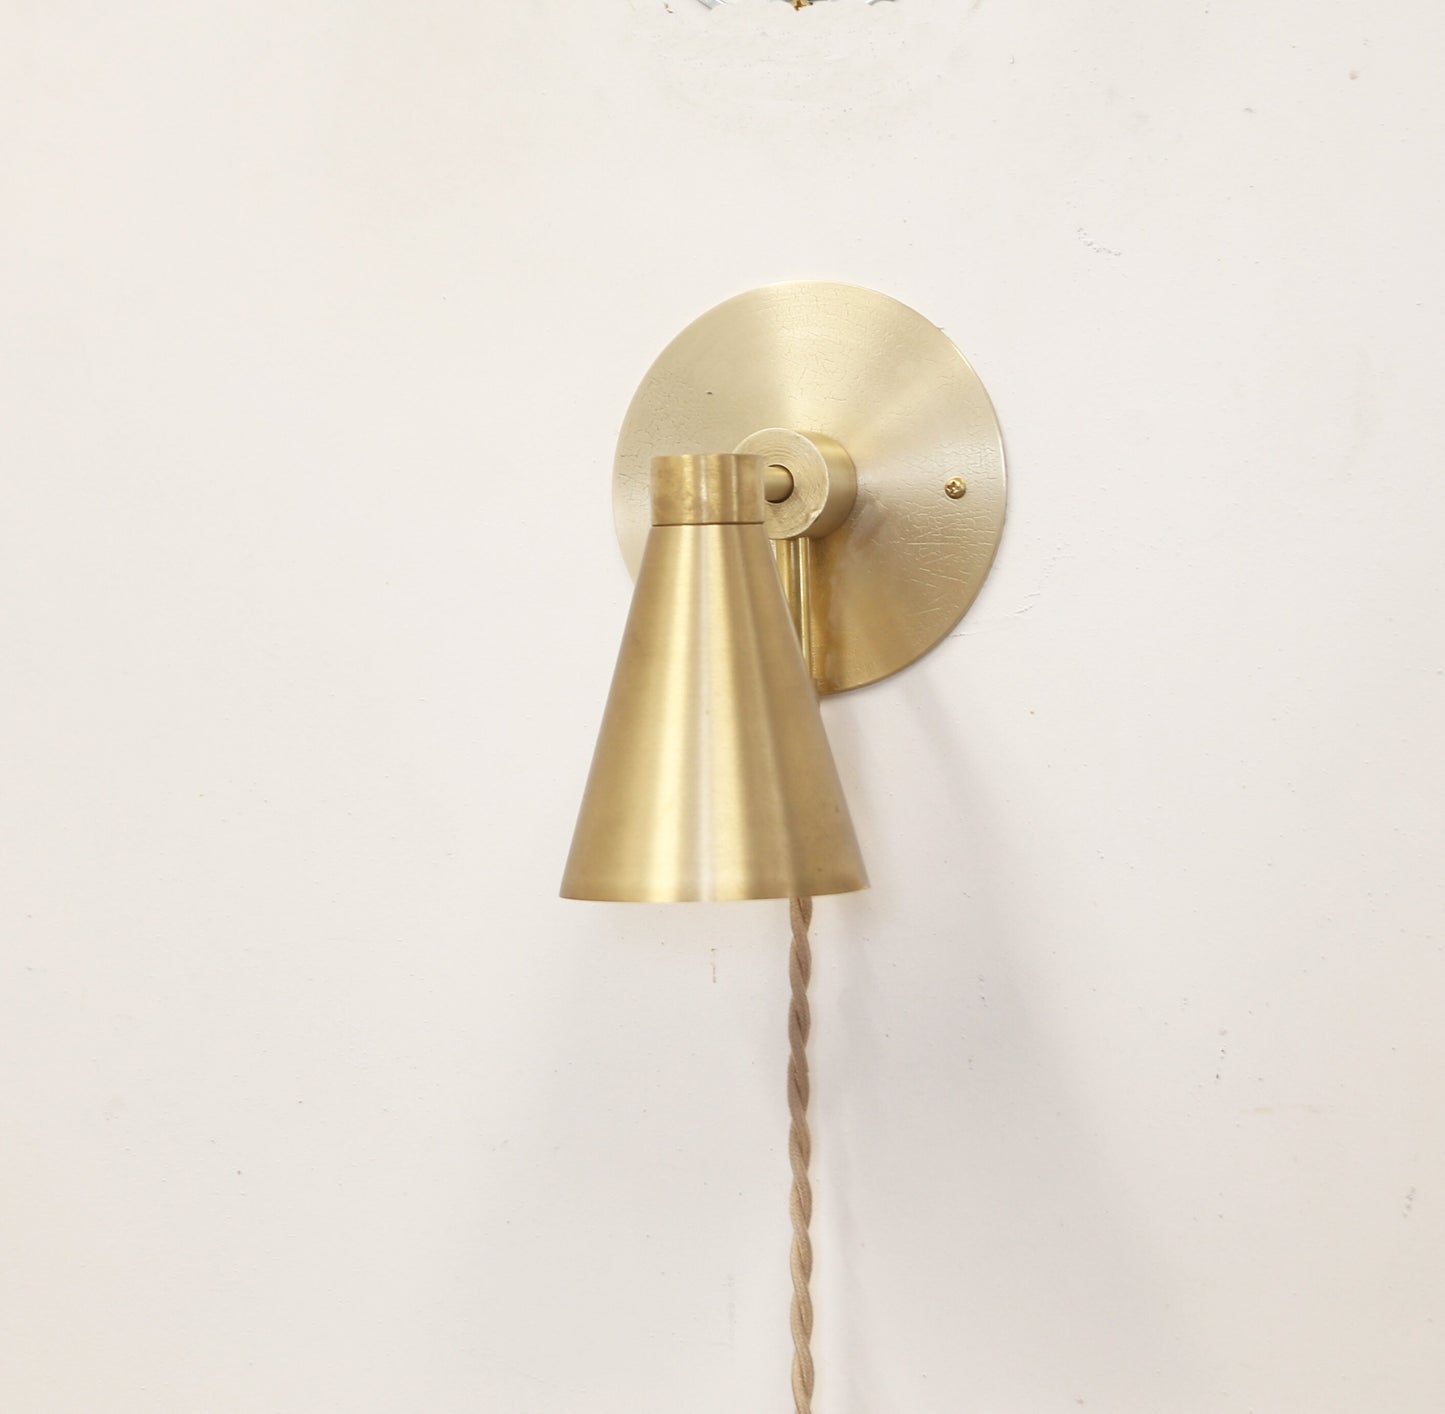 Pug-in Brass Wall Sconce  light with, Modern brass light,  Mid Century brass wall sconce light, Minimal Sconce Light